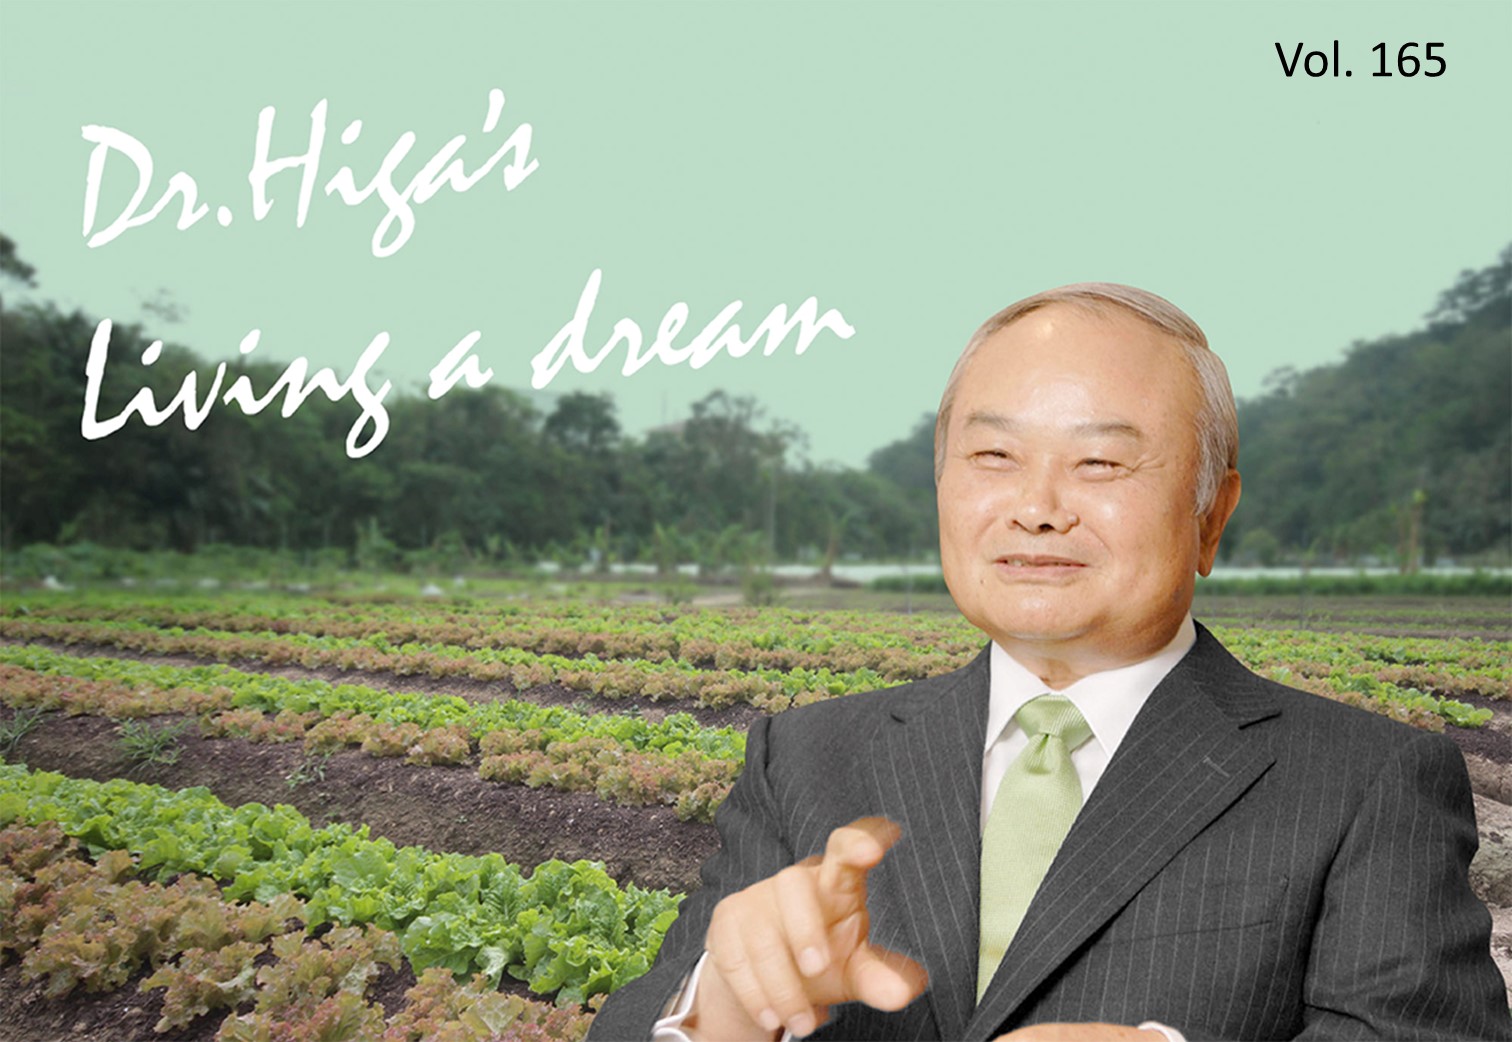 ​Dr. Higa's "Living a Dream": the latest article #165 is UP!!